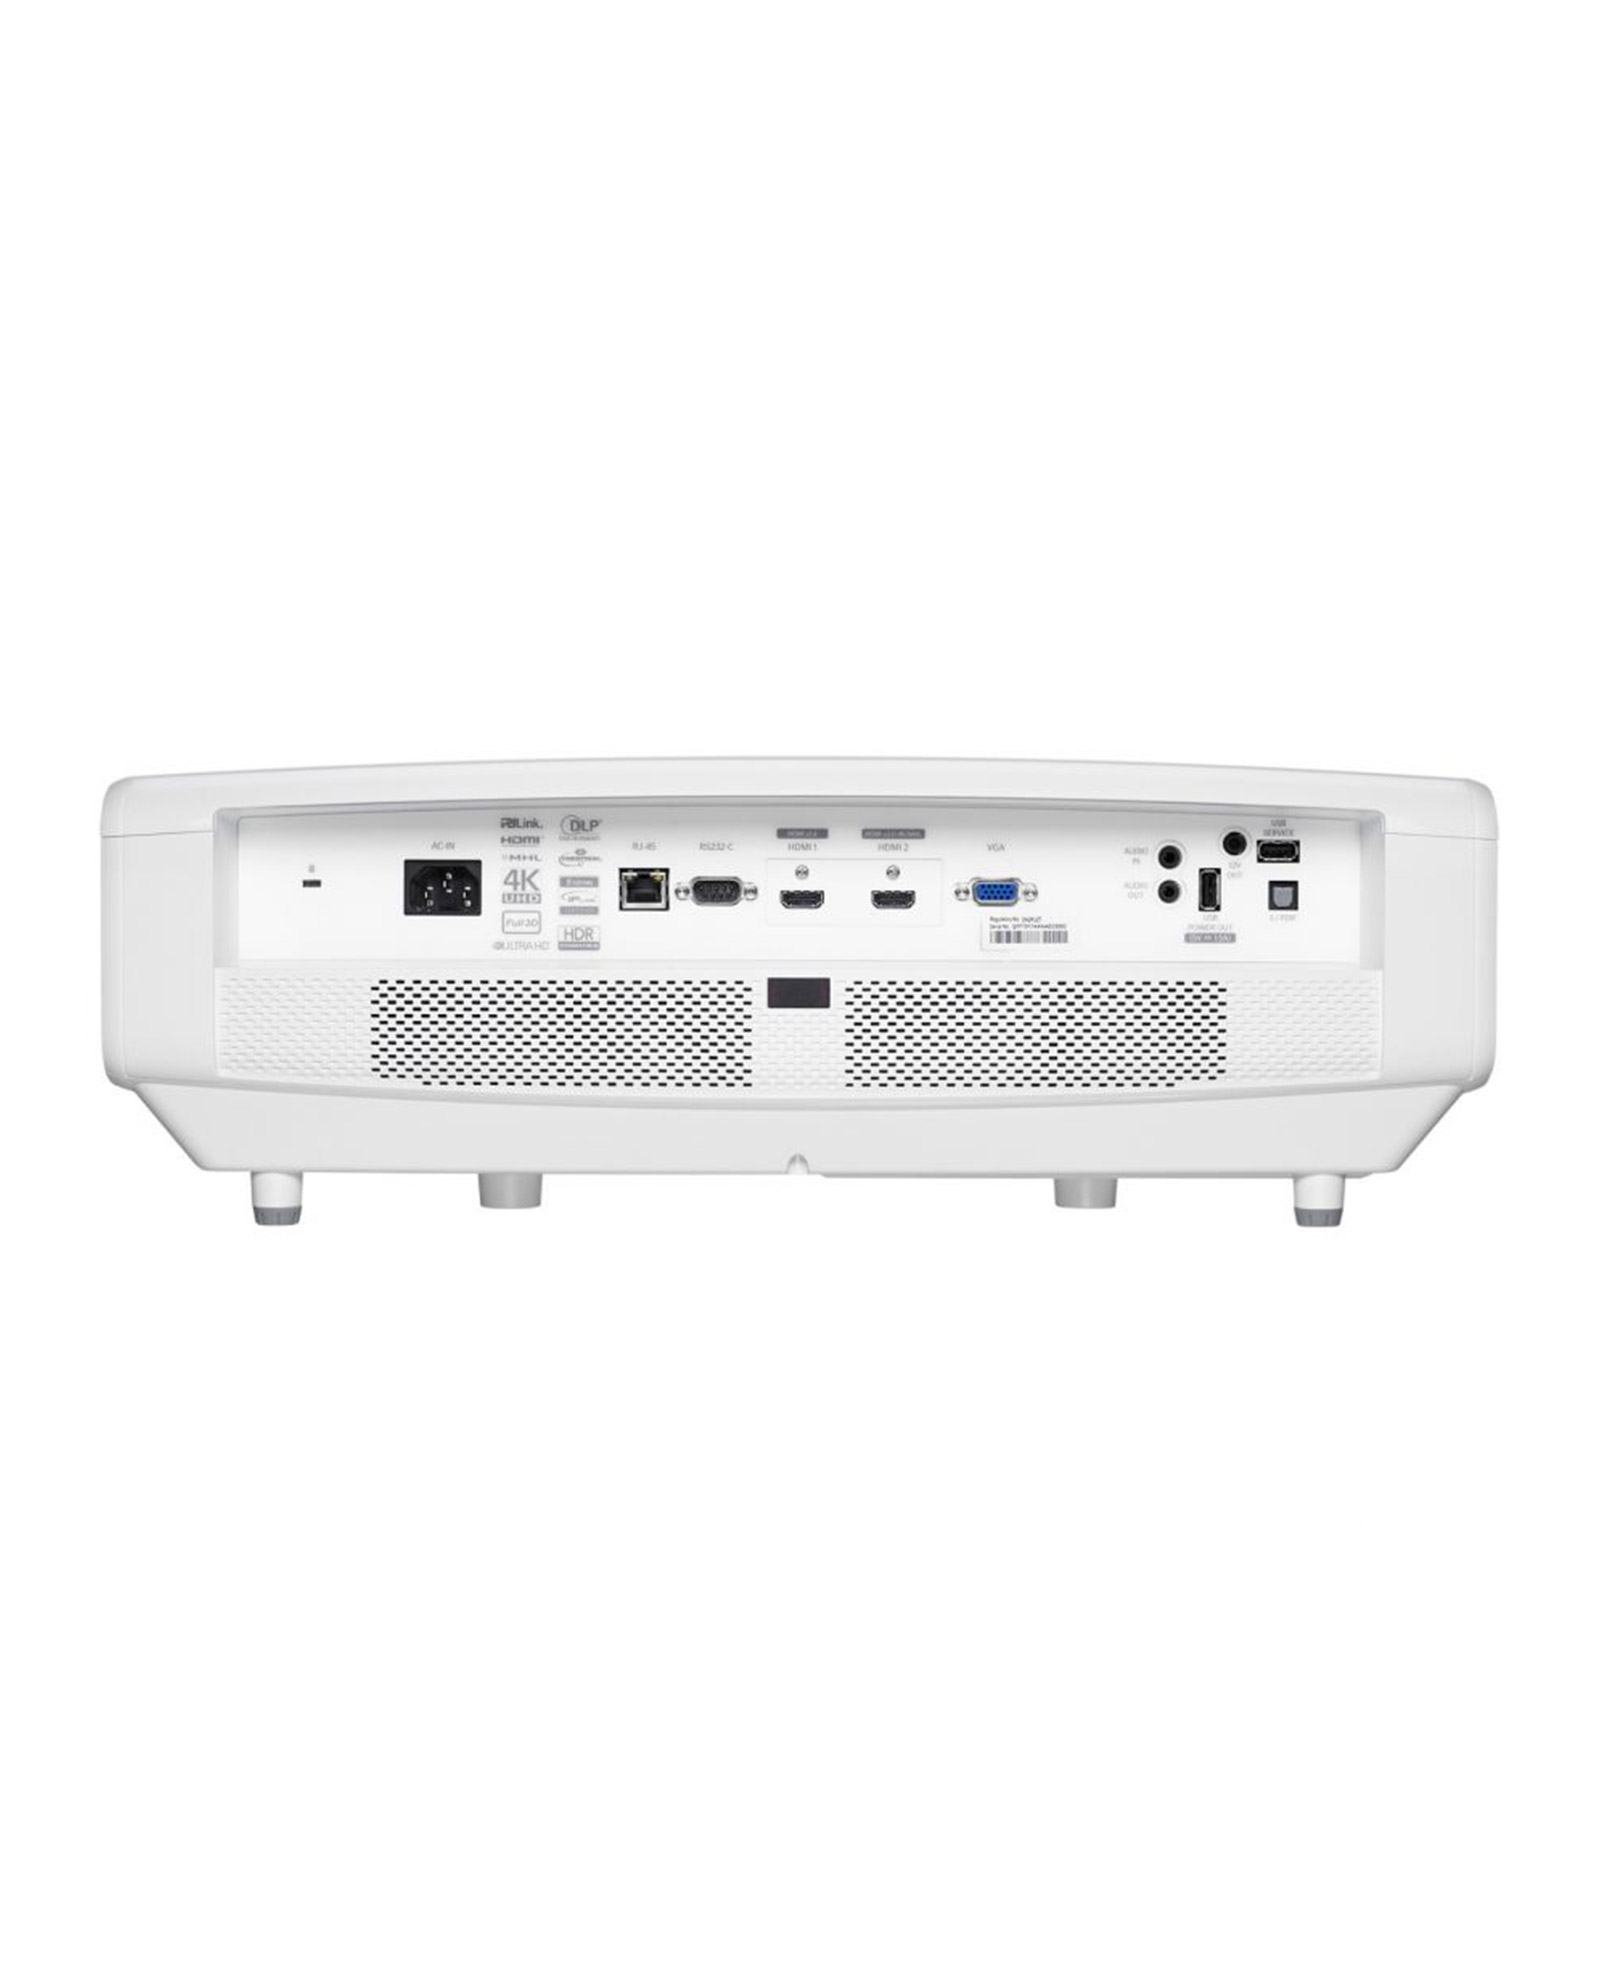 Optoma Uhd65lv 4k Udh Hdr Laser Home Theatre Projector 1